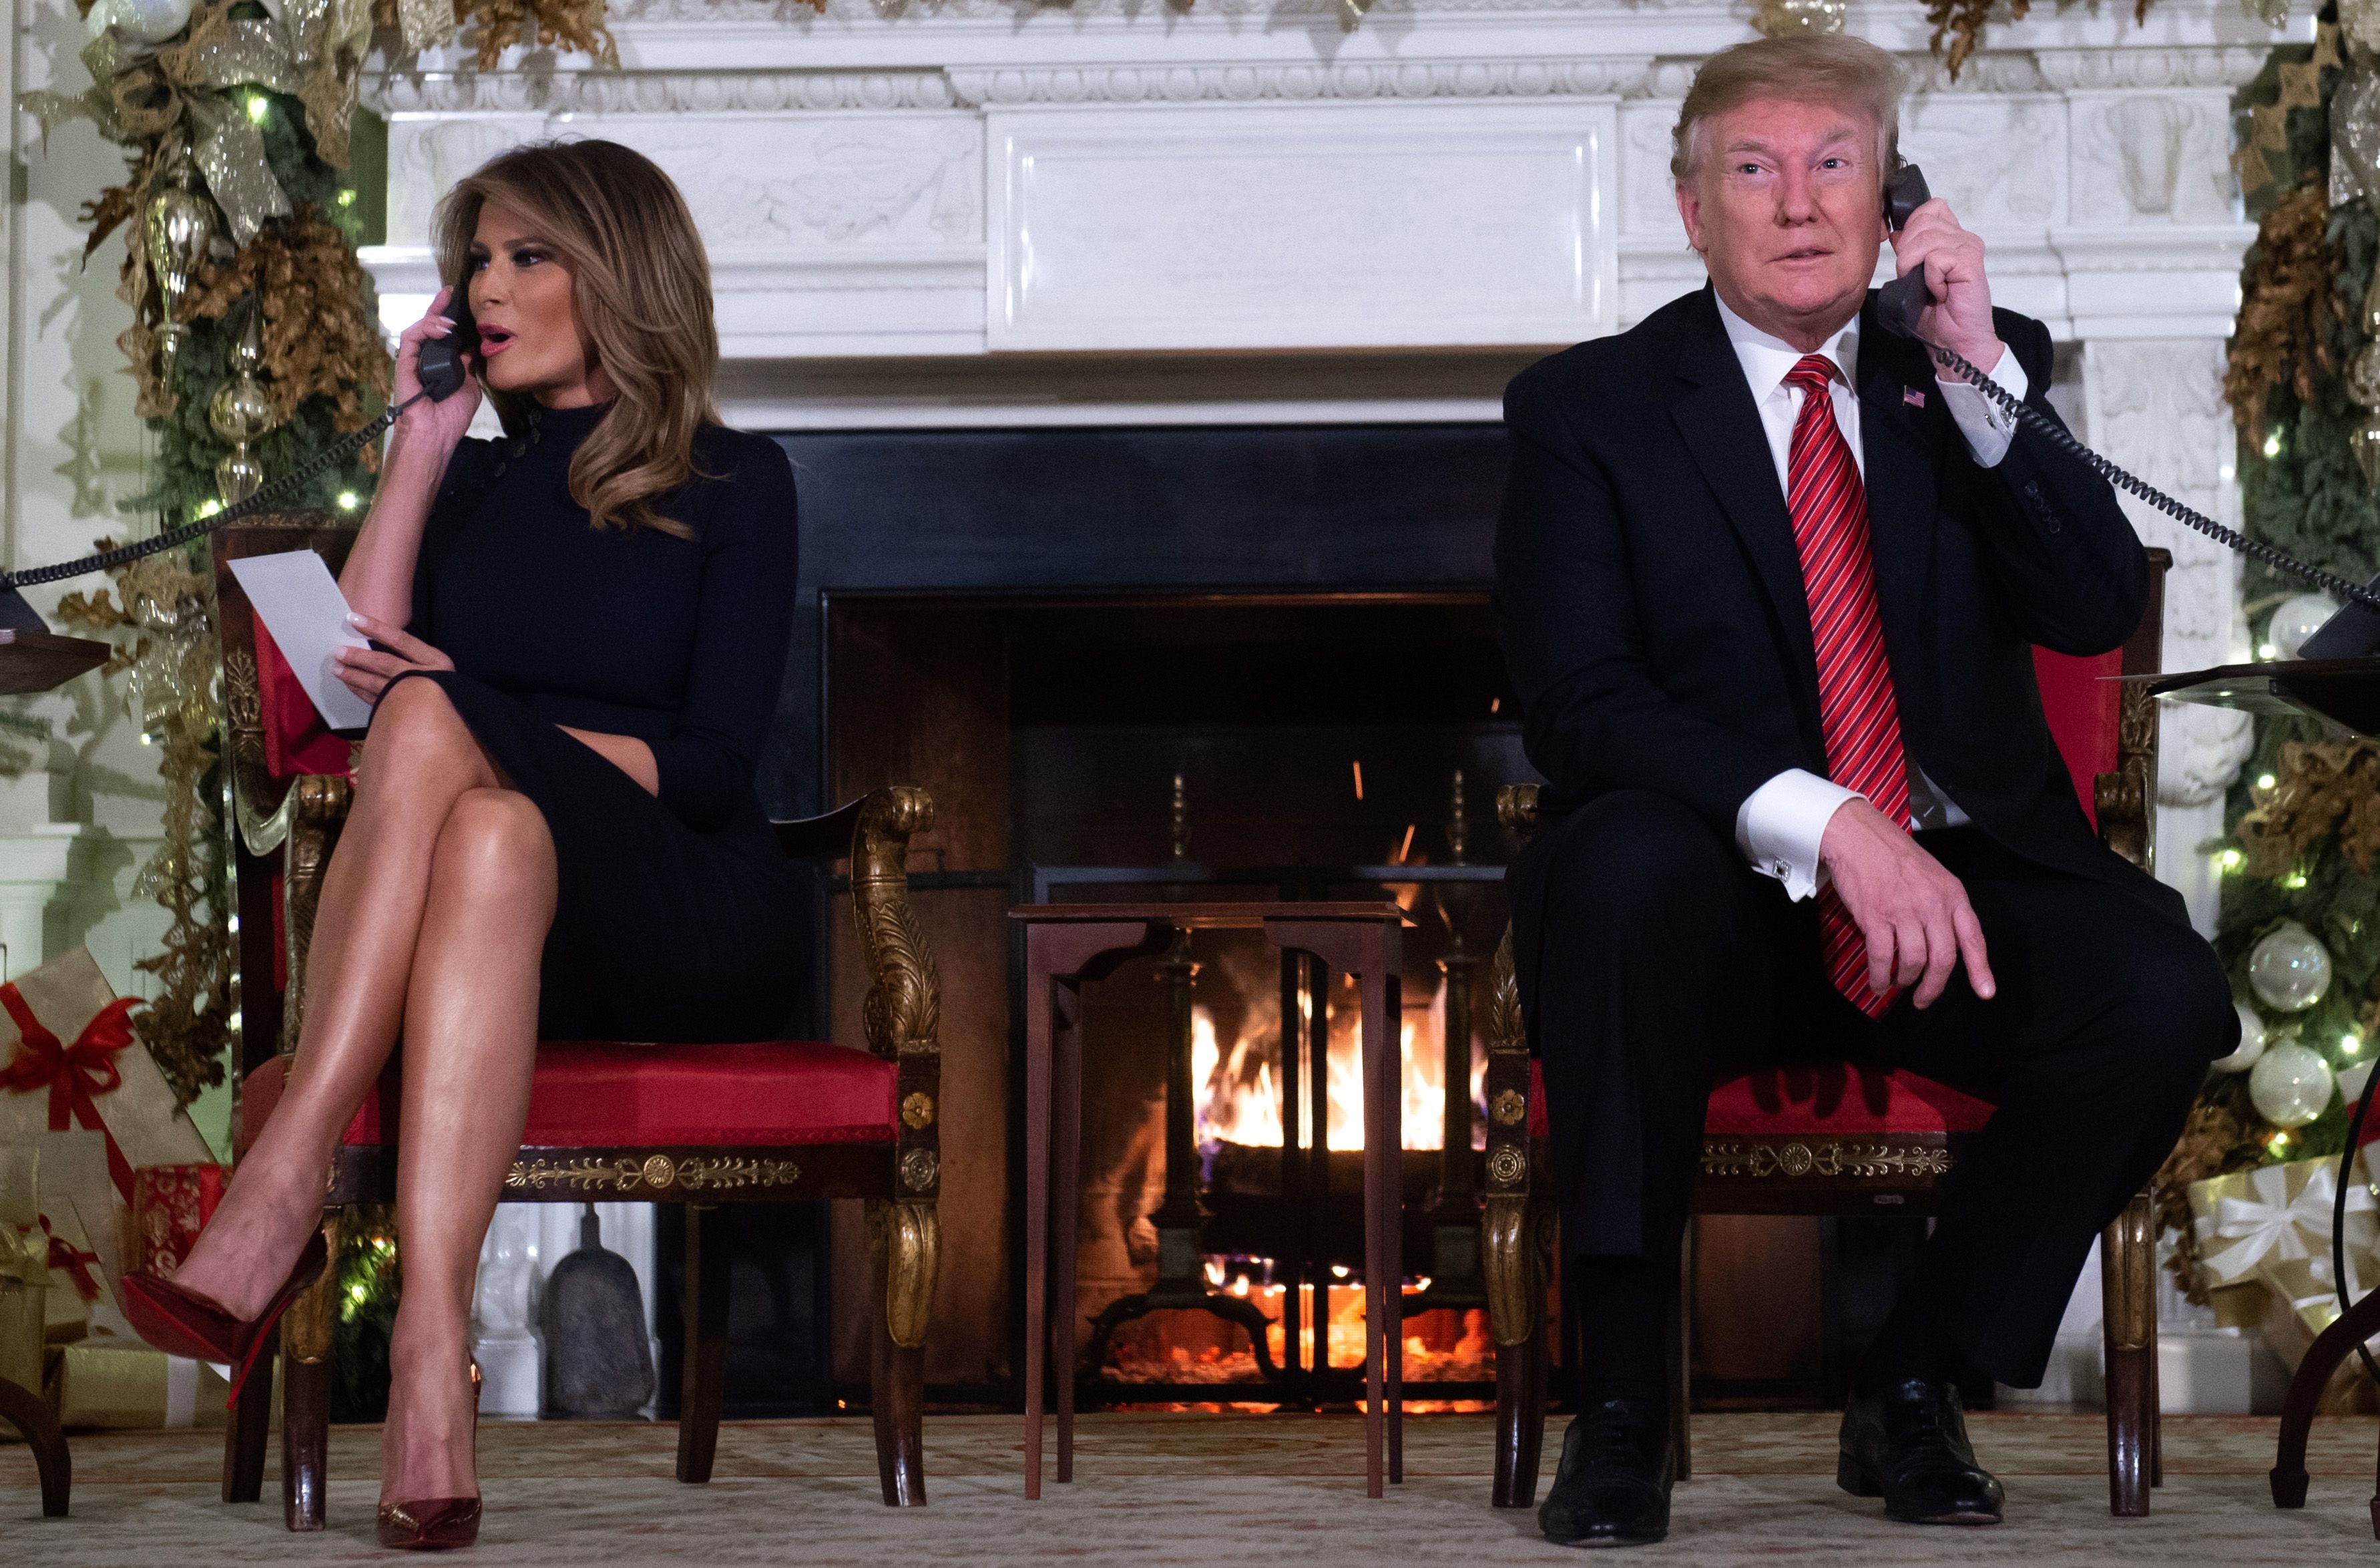 TOPSHOT - US President Donald Trump and First Lady Melania Trump speak on the telephone as they answers calls from people calling into the NORAD Santa tracker phone line in the State Dining Room of the White House in Washington, DC, on December 24, 2018. (Photo by SAUL LOEB/AFP/Getty Images)